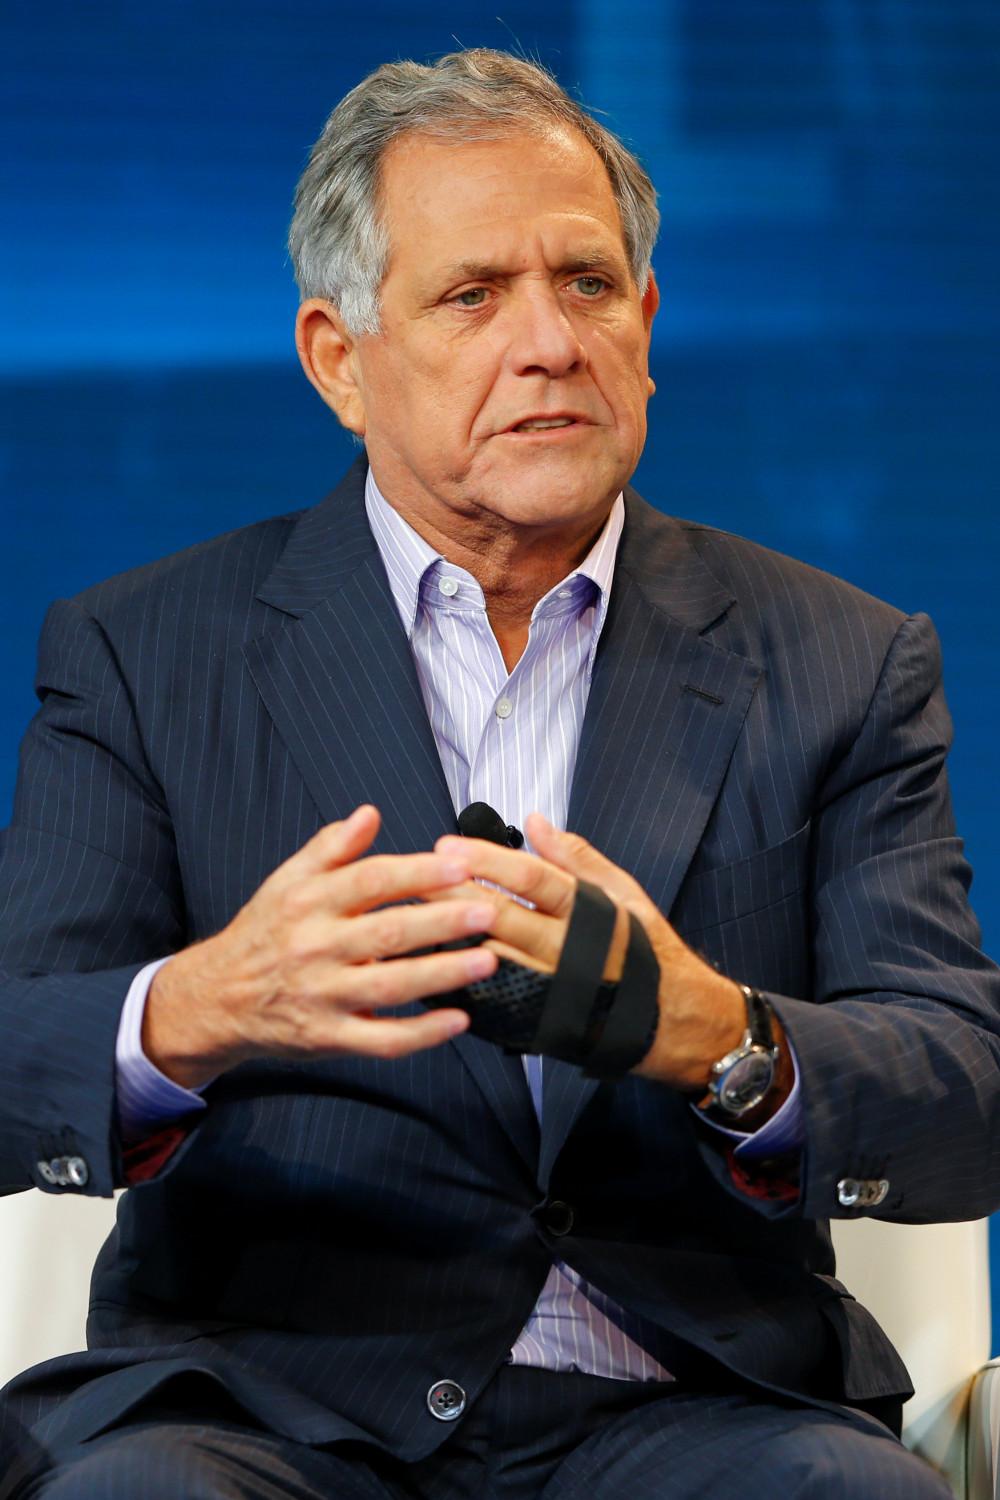 Leslie Moonves, president and CEO of CBS Corporation, speaks at the Wall Street Journal Digital Live conference at the Montage hotel in Laguna Beach, Calif., on Oct. 21, 2015. (Mike Blake/Reuters/File Photo)